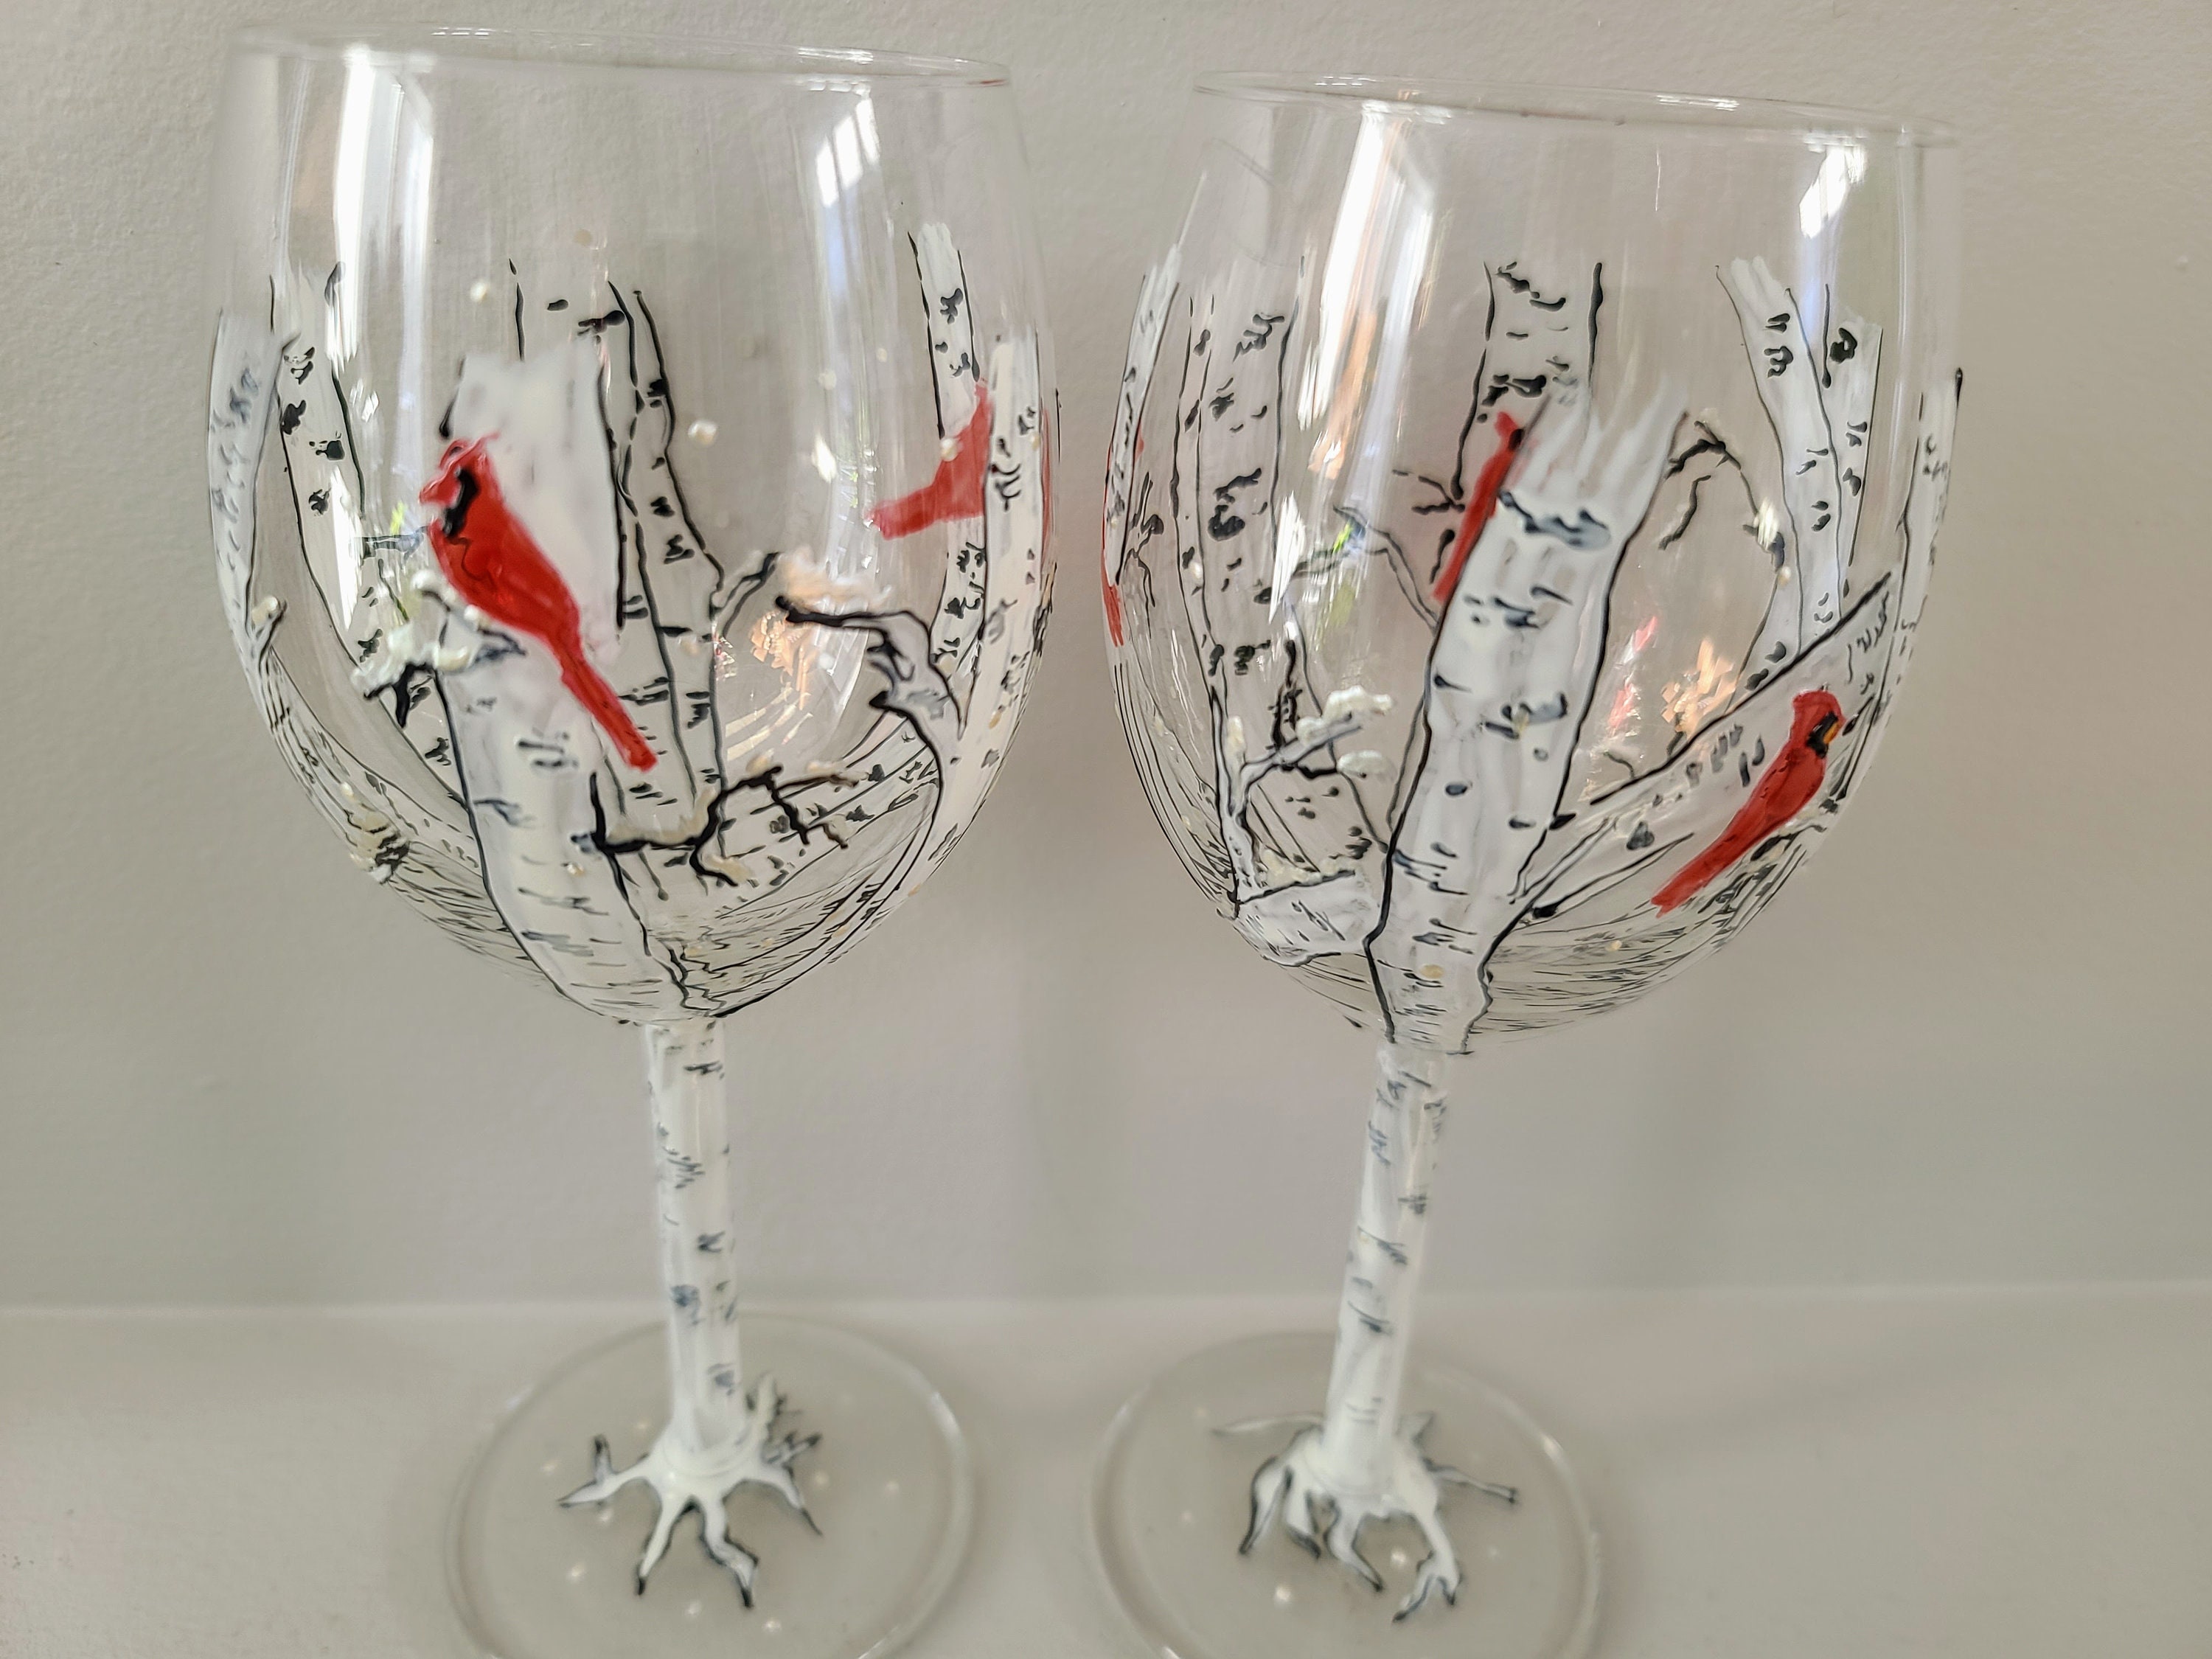  Hand Painted Martini Glasses - Winter Snow with Red Cardinal  (Set of 2) : Handmade Products